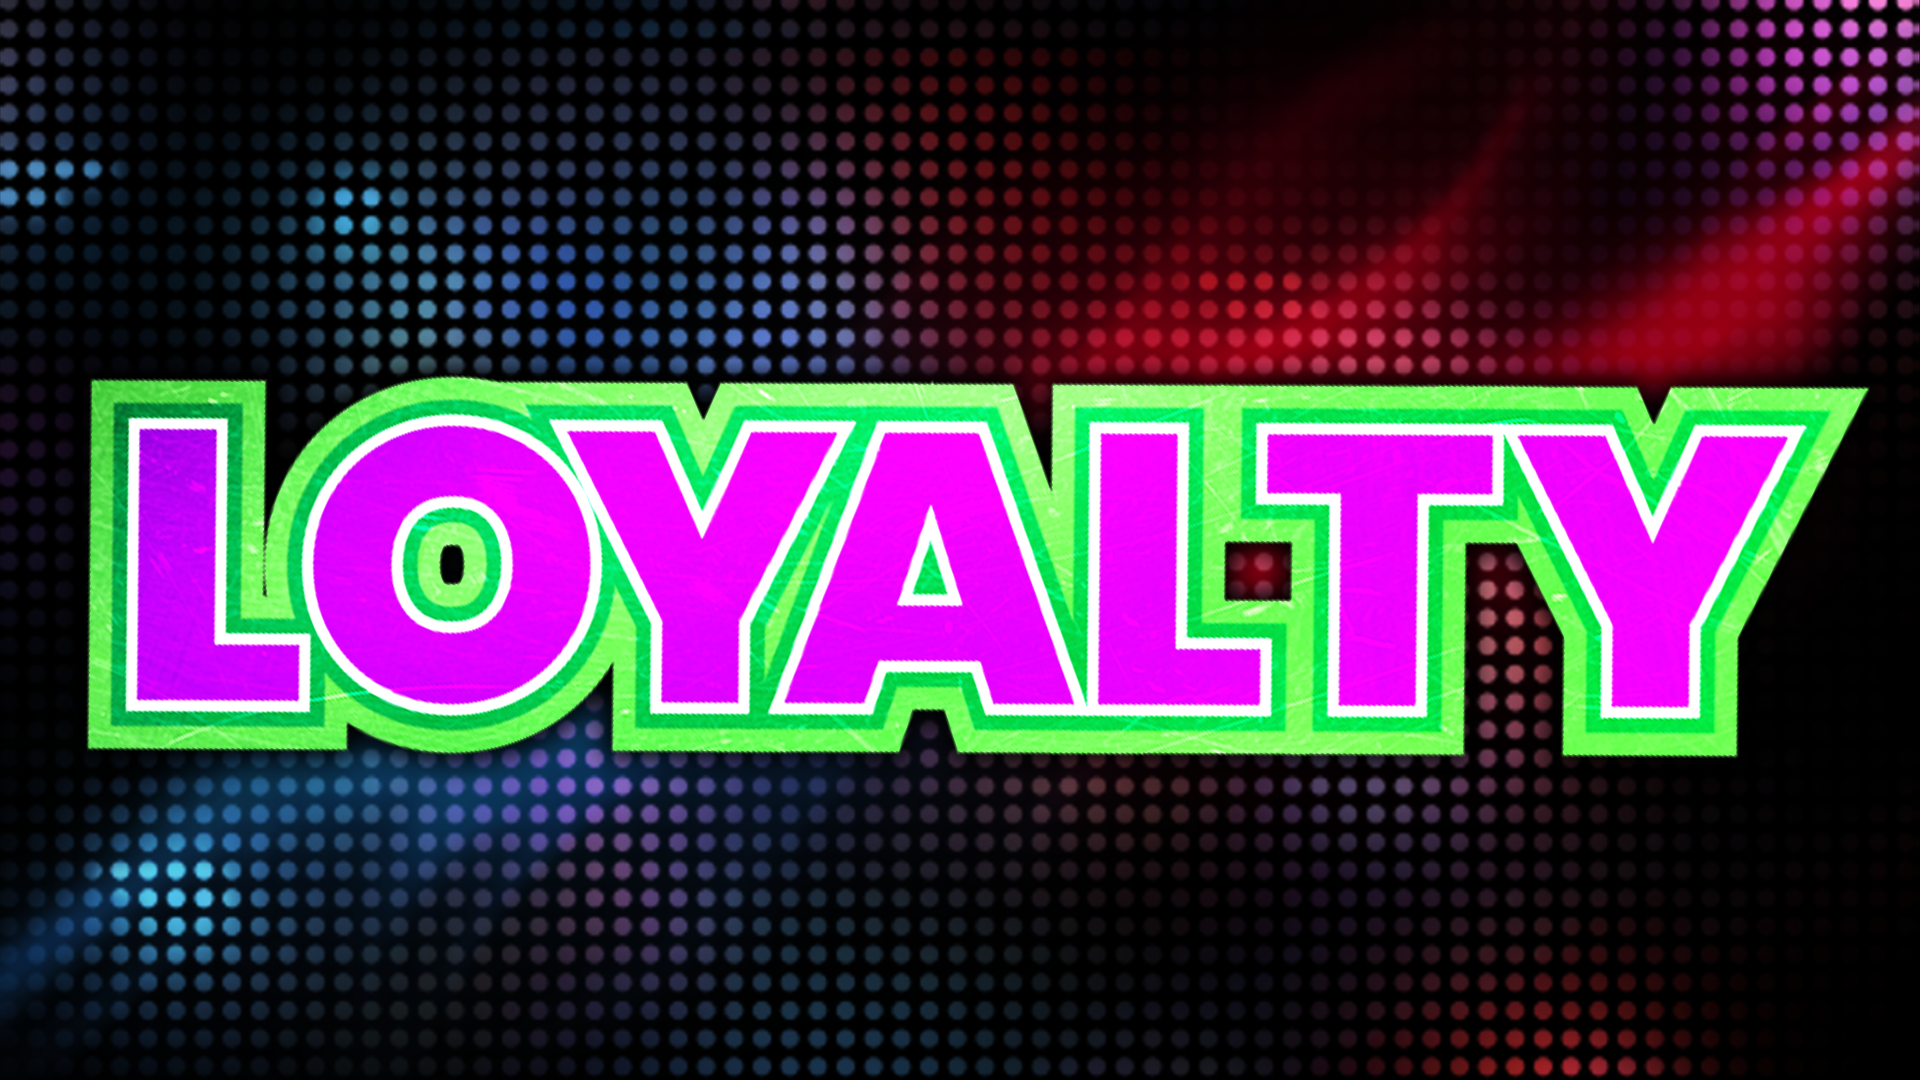 Icon for LOYALTY